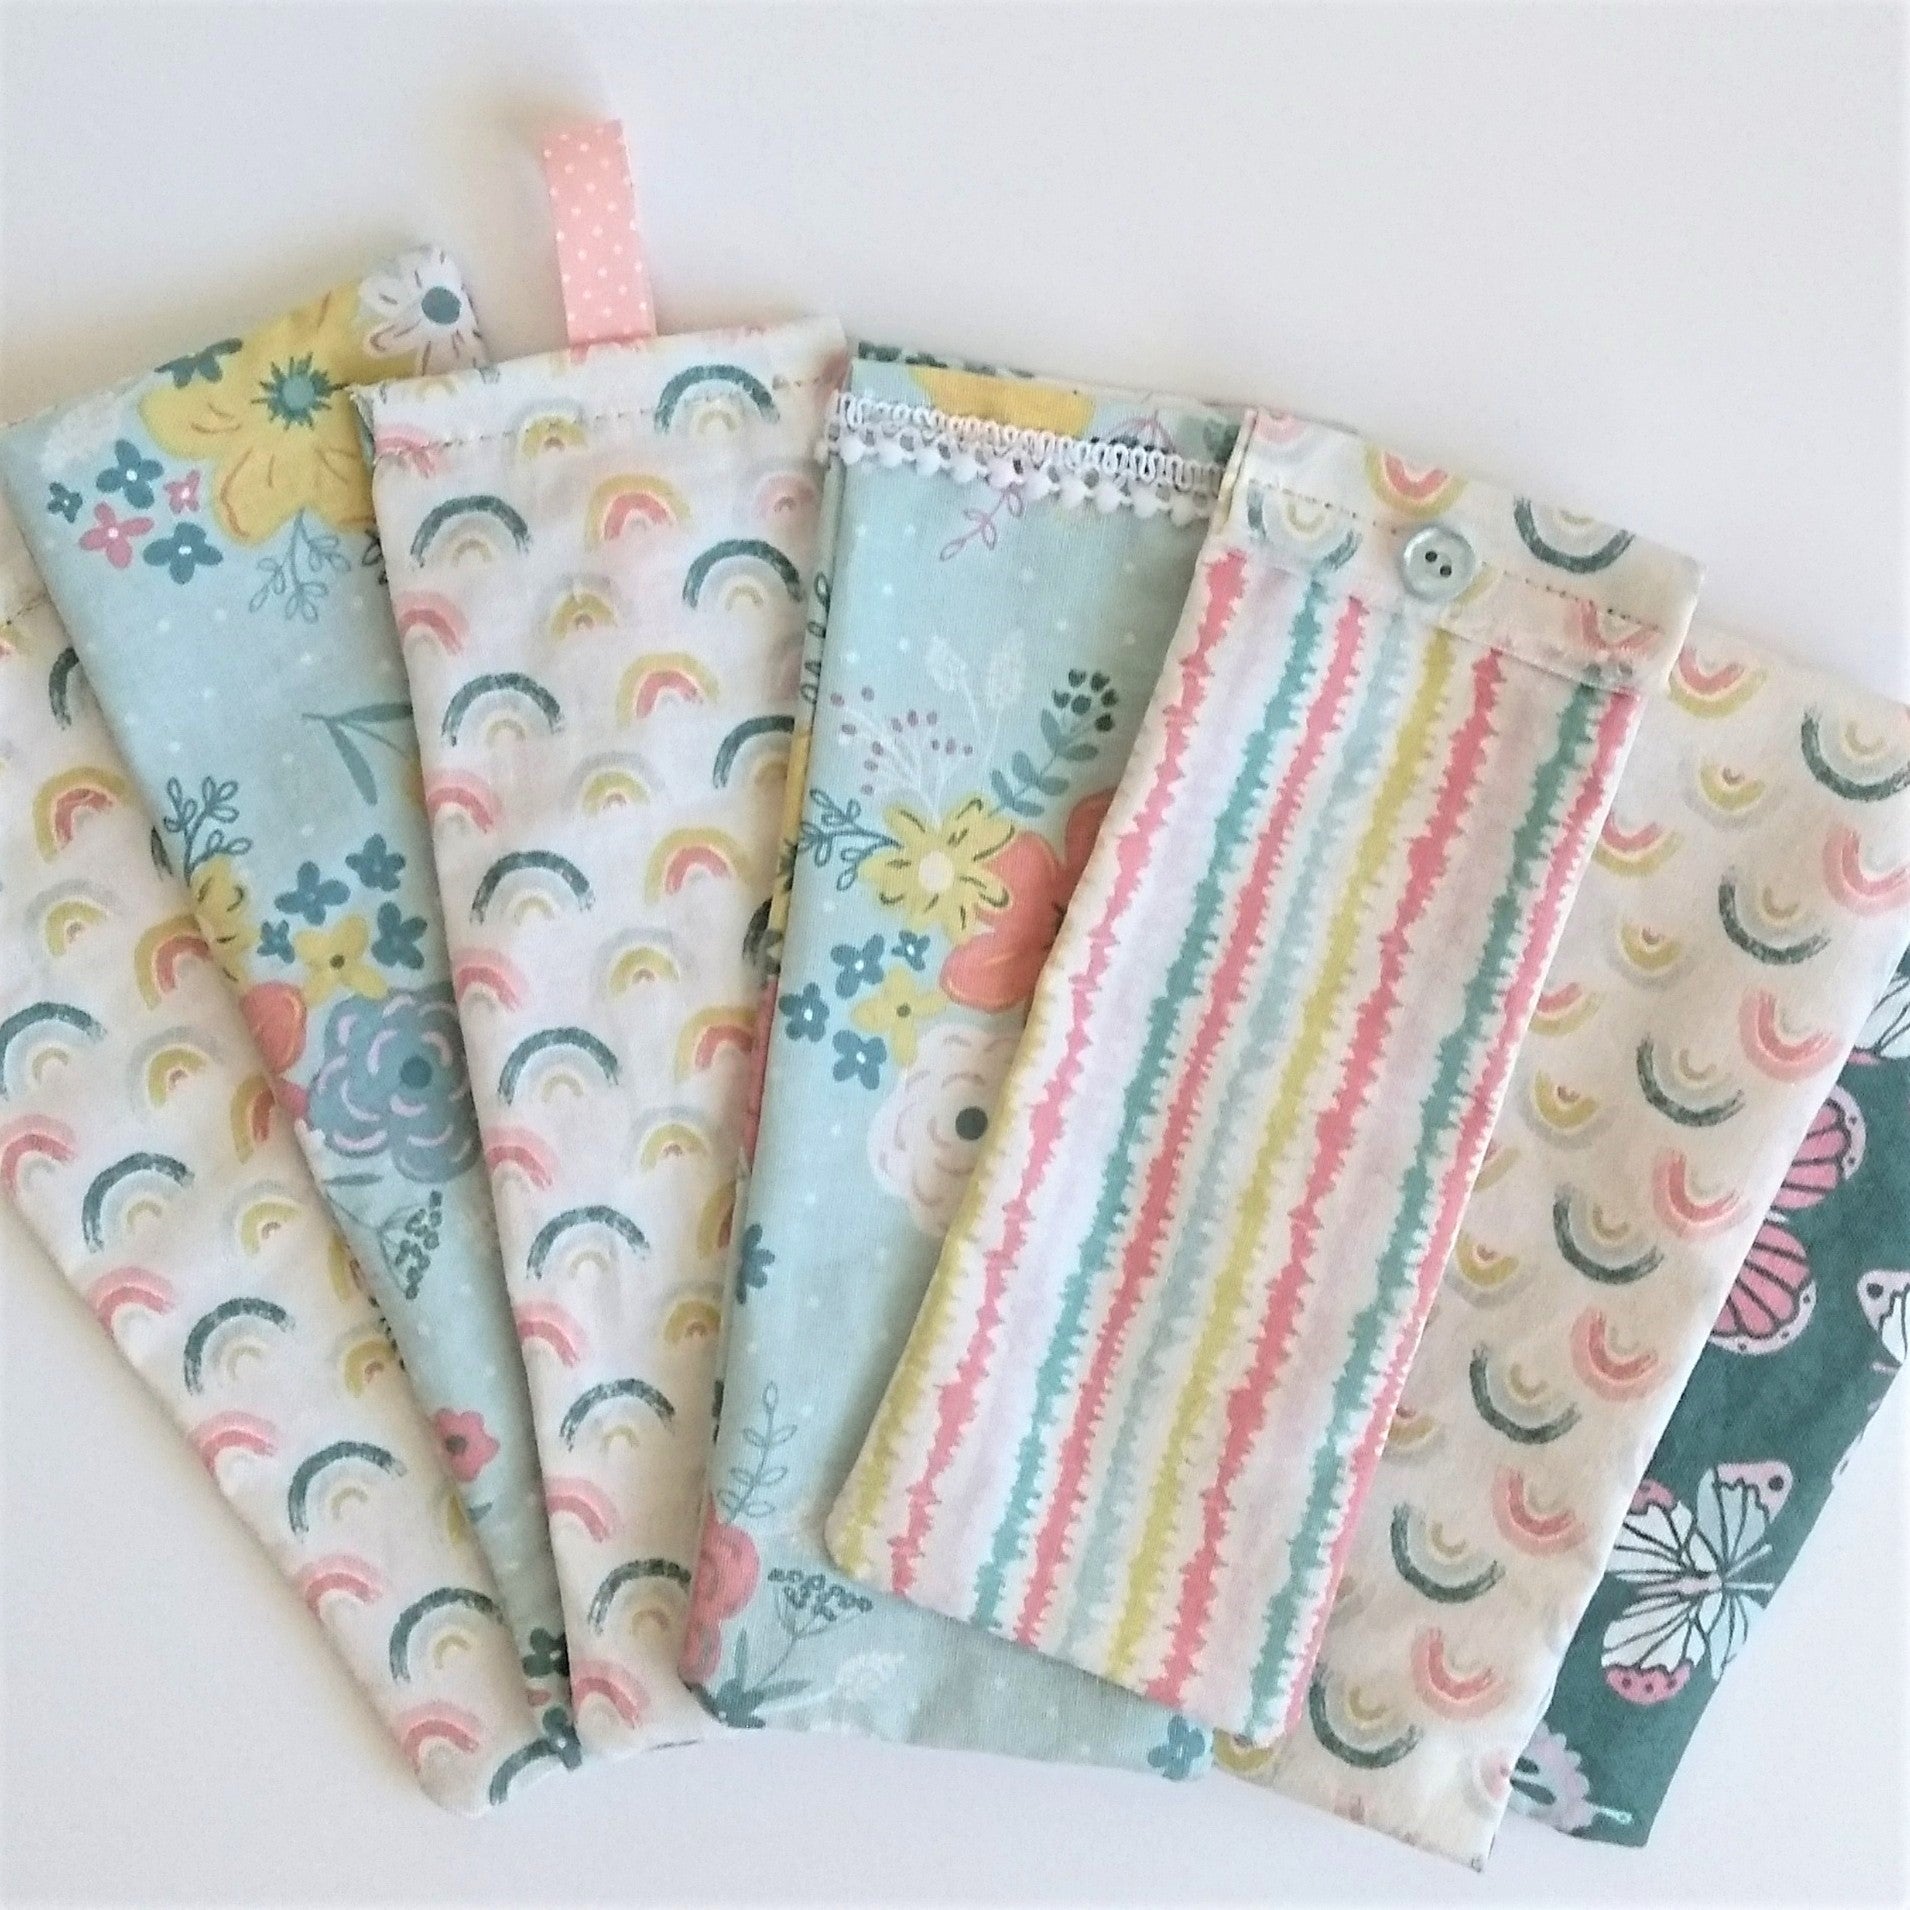 Five Patch Design Fabric Bookmarks Tutorial